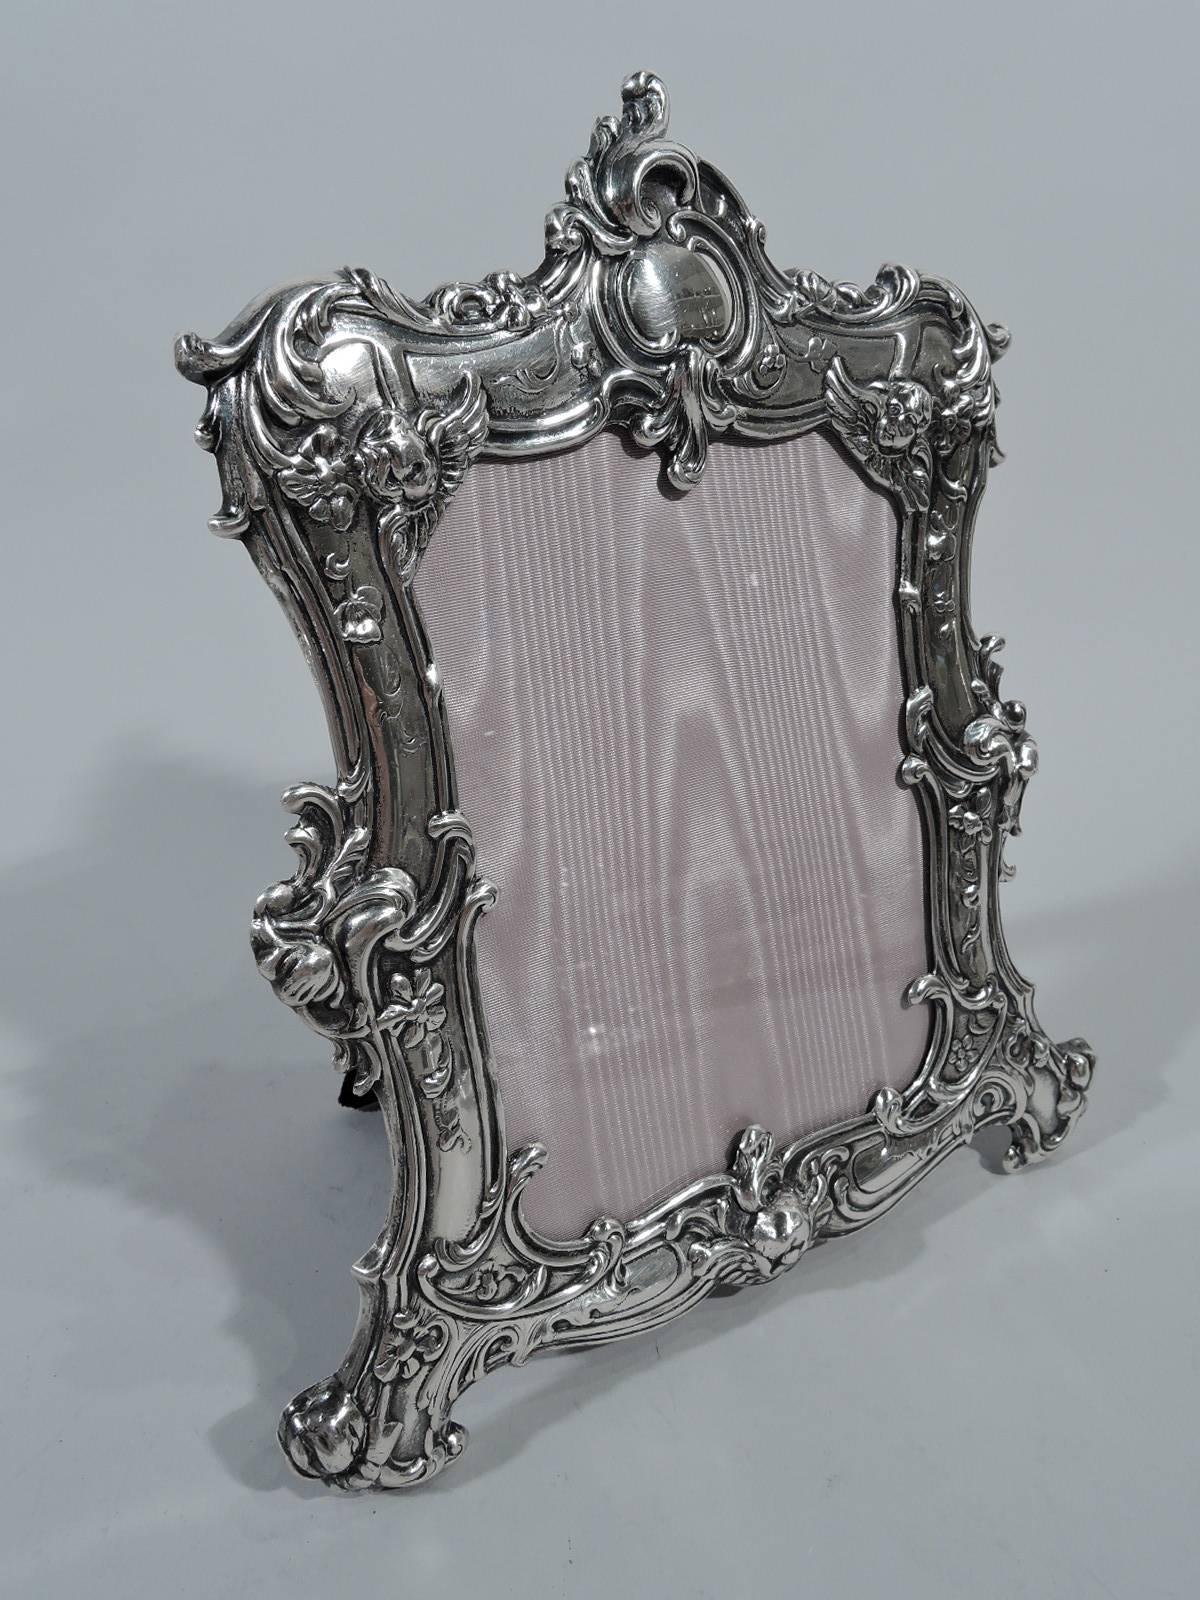 Fancy Rococo sterling silver picture frame. Made by Gorham in Providence. Dynamic and scrolled surround with bracket feet: Ornament chased and applied: Flowers, leaves, scrolls, and winged cherub’s heads. At top asymmetrical cartouche (vacant). With